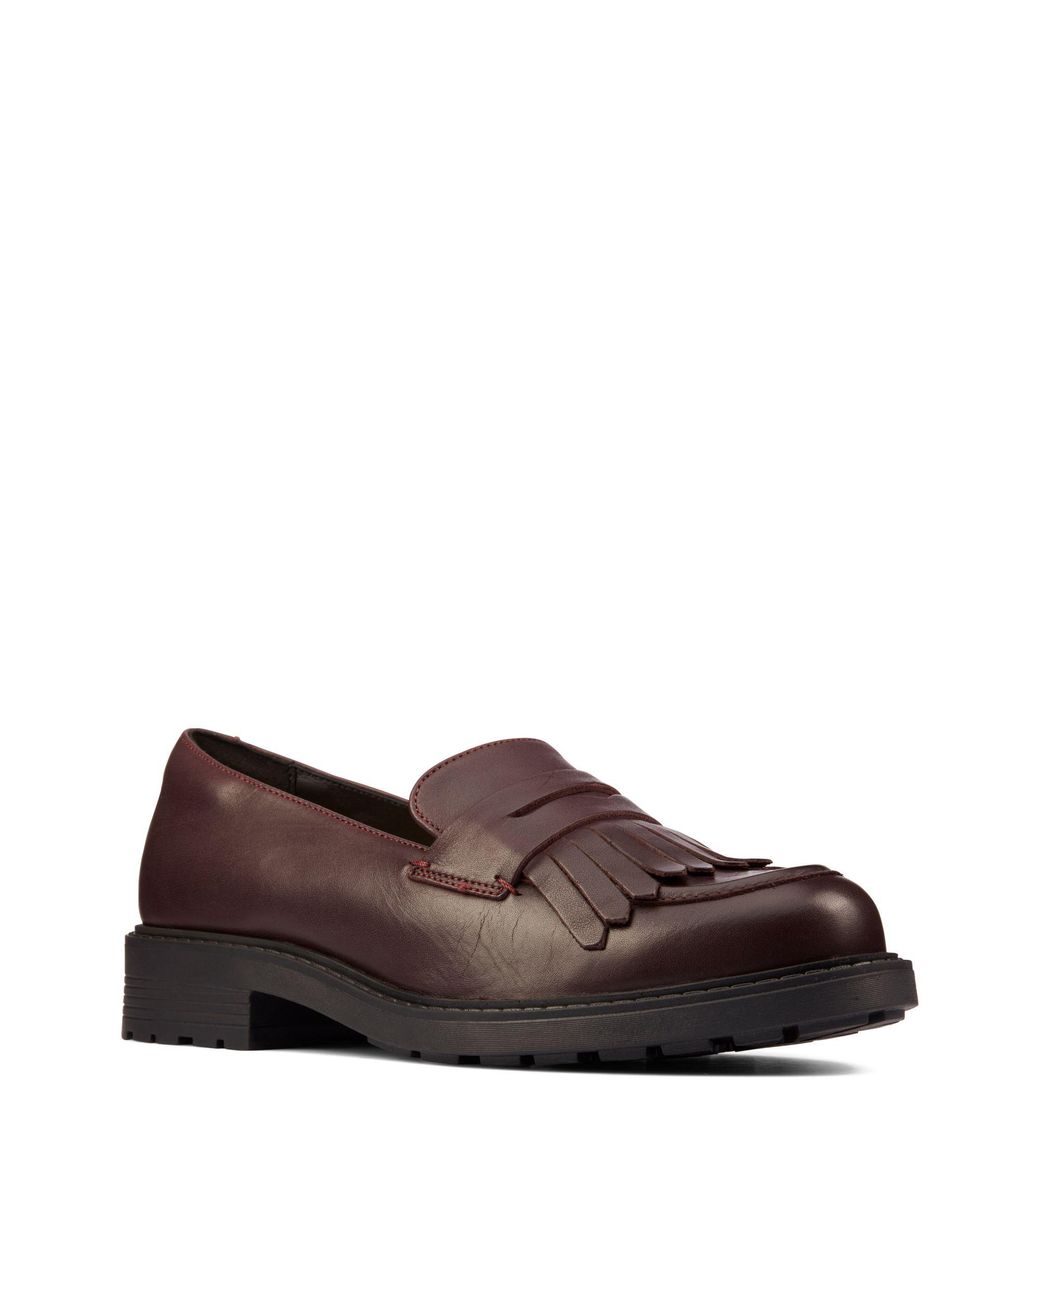 Clarks Leather Orinoco 2 Loafer in Burgundy Leather (Brown) | Lyst